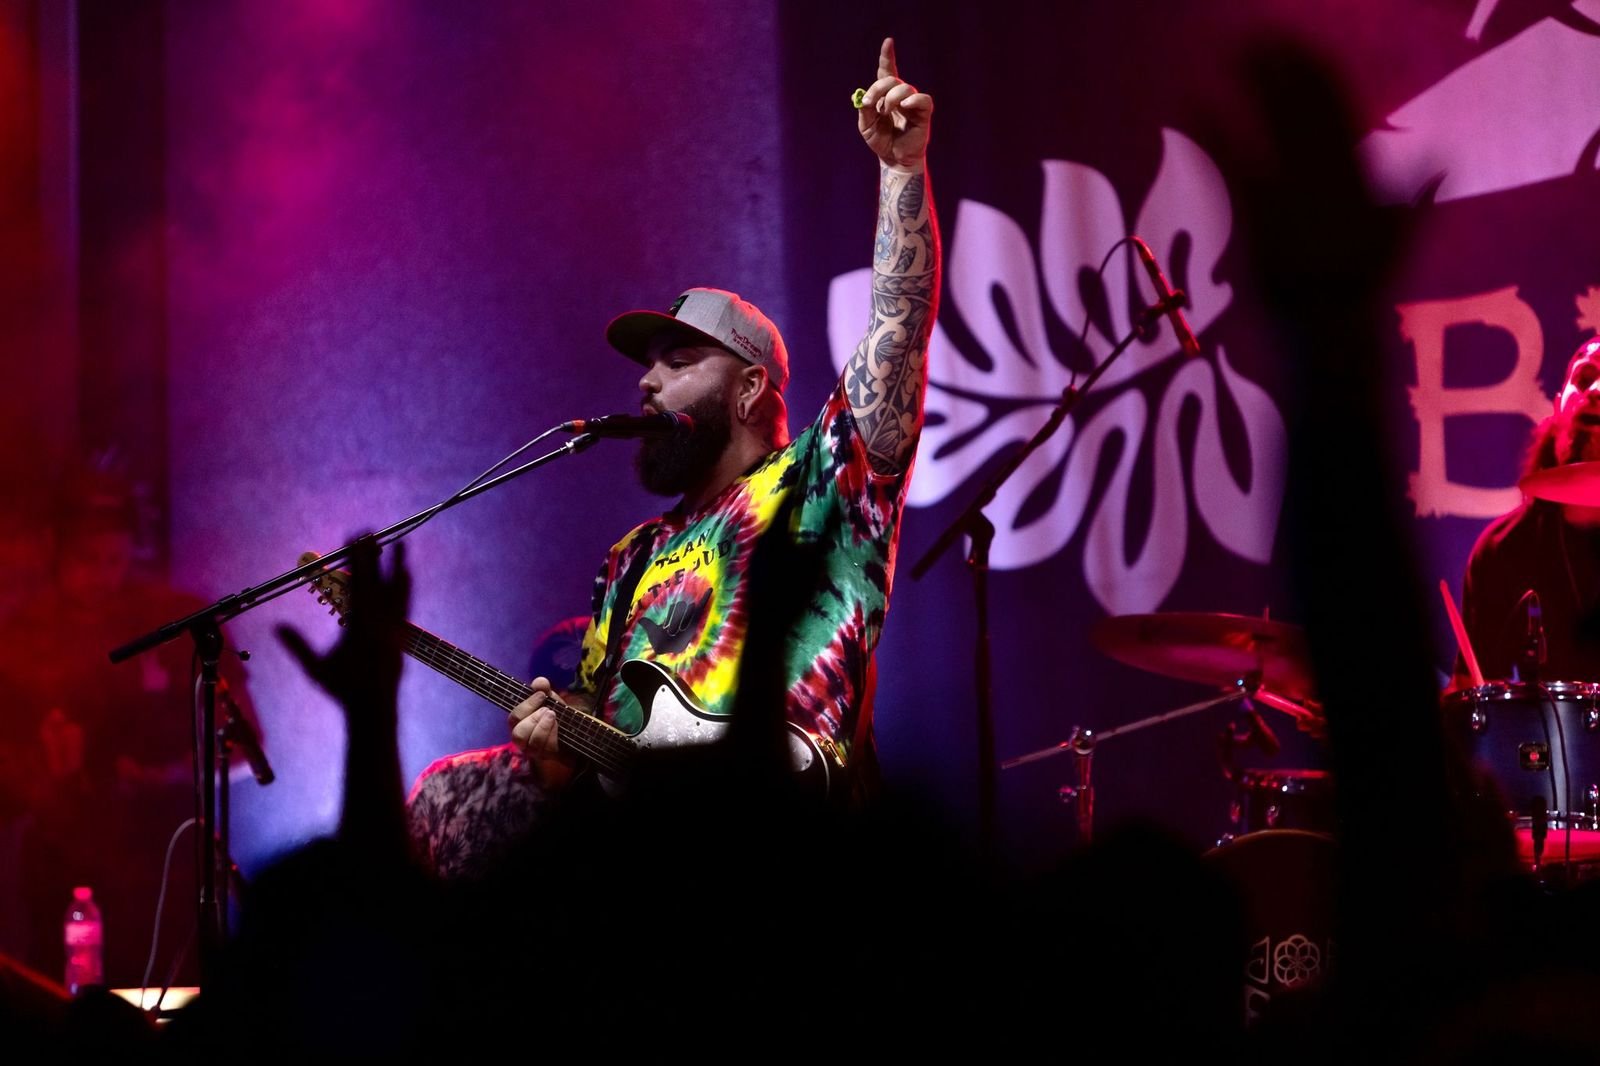 Music artist Joe Samba performs on stage, playing a guitar and singing into a microphone. He is wearing a colorful tie-dye shirt and a gray cap, with his tattooed arm raised and pointing upwards. The background features a vibrant stage setup with purple and pink lighting and a drum set. The silhouettes of the audience's raised hands are visible in the foreground, adding to the lively concert atmosphere.